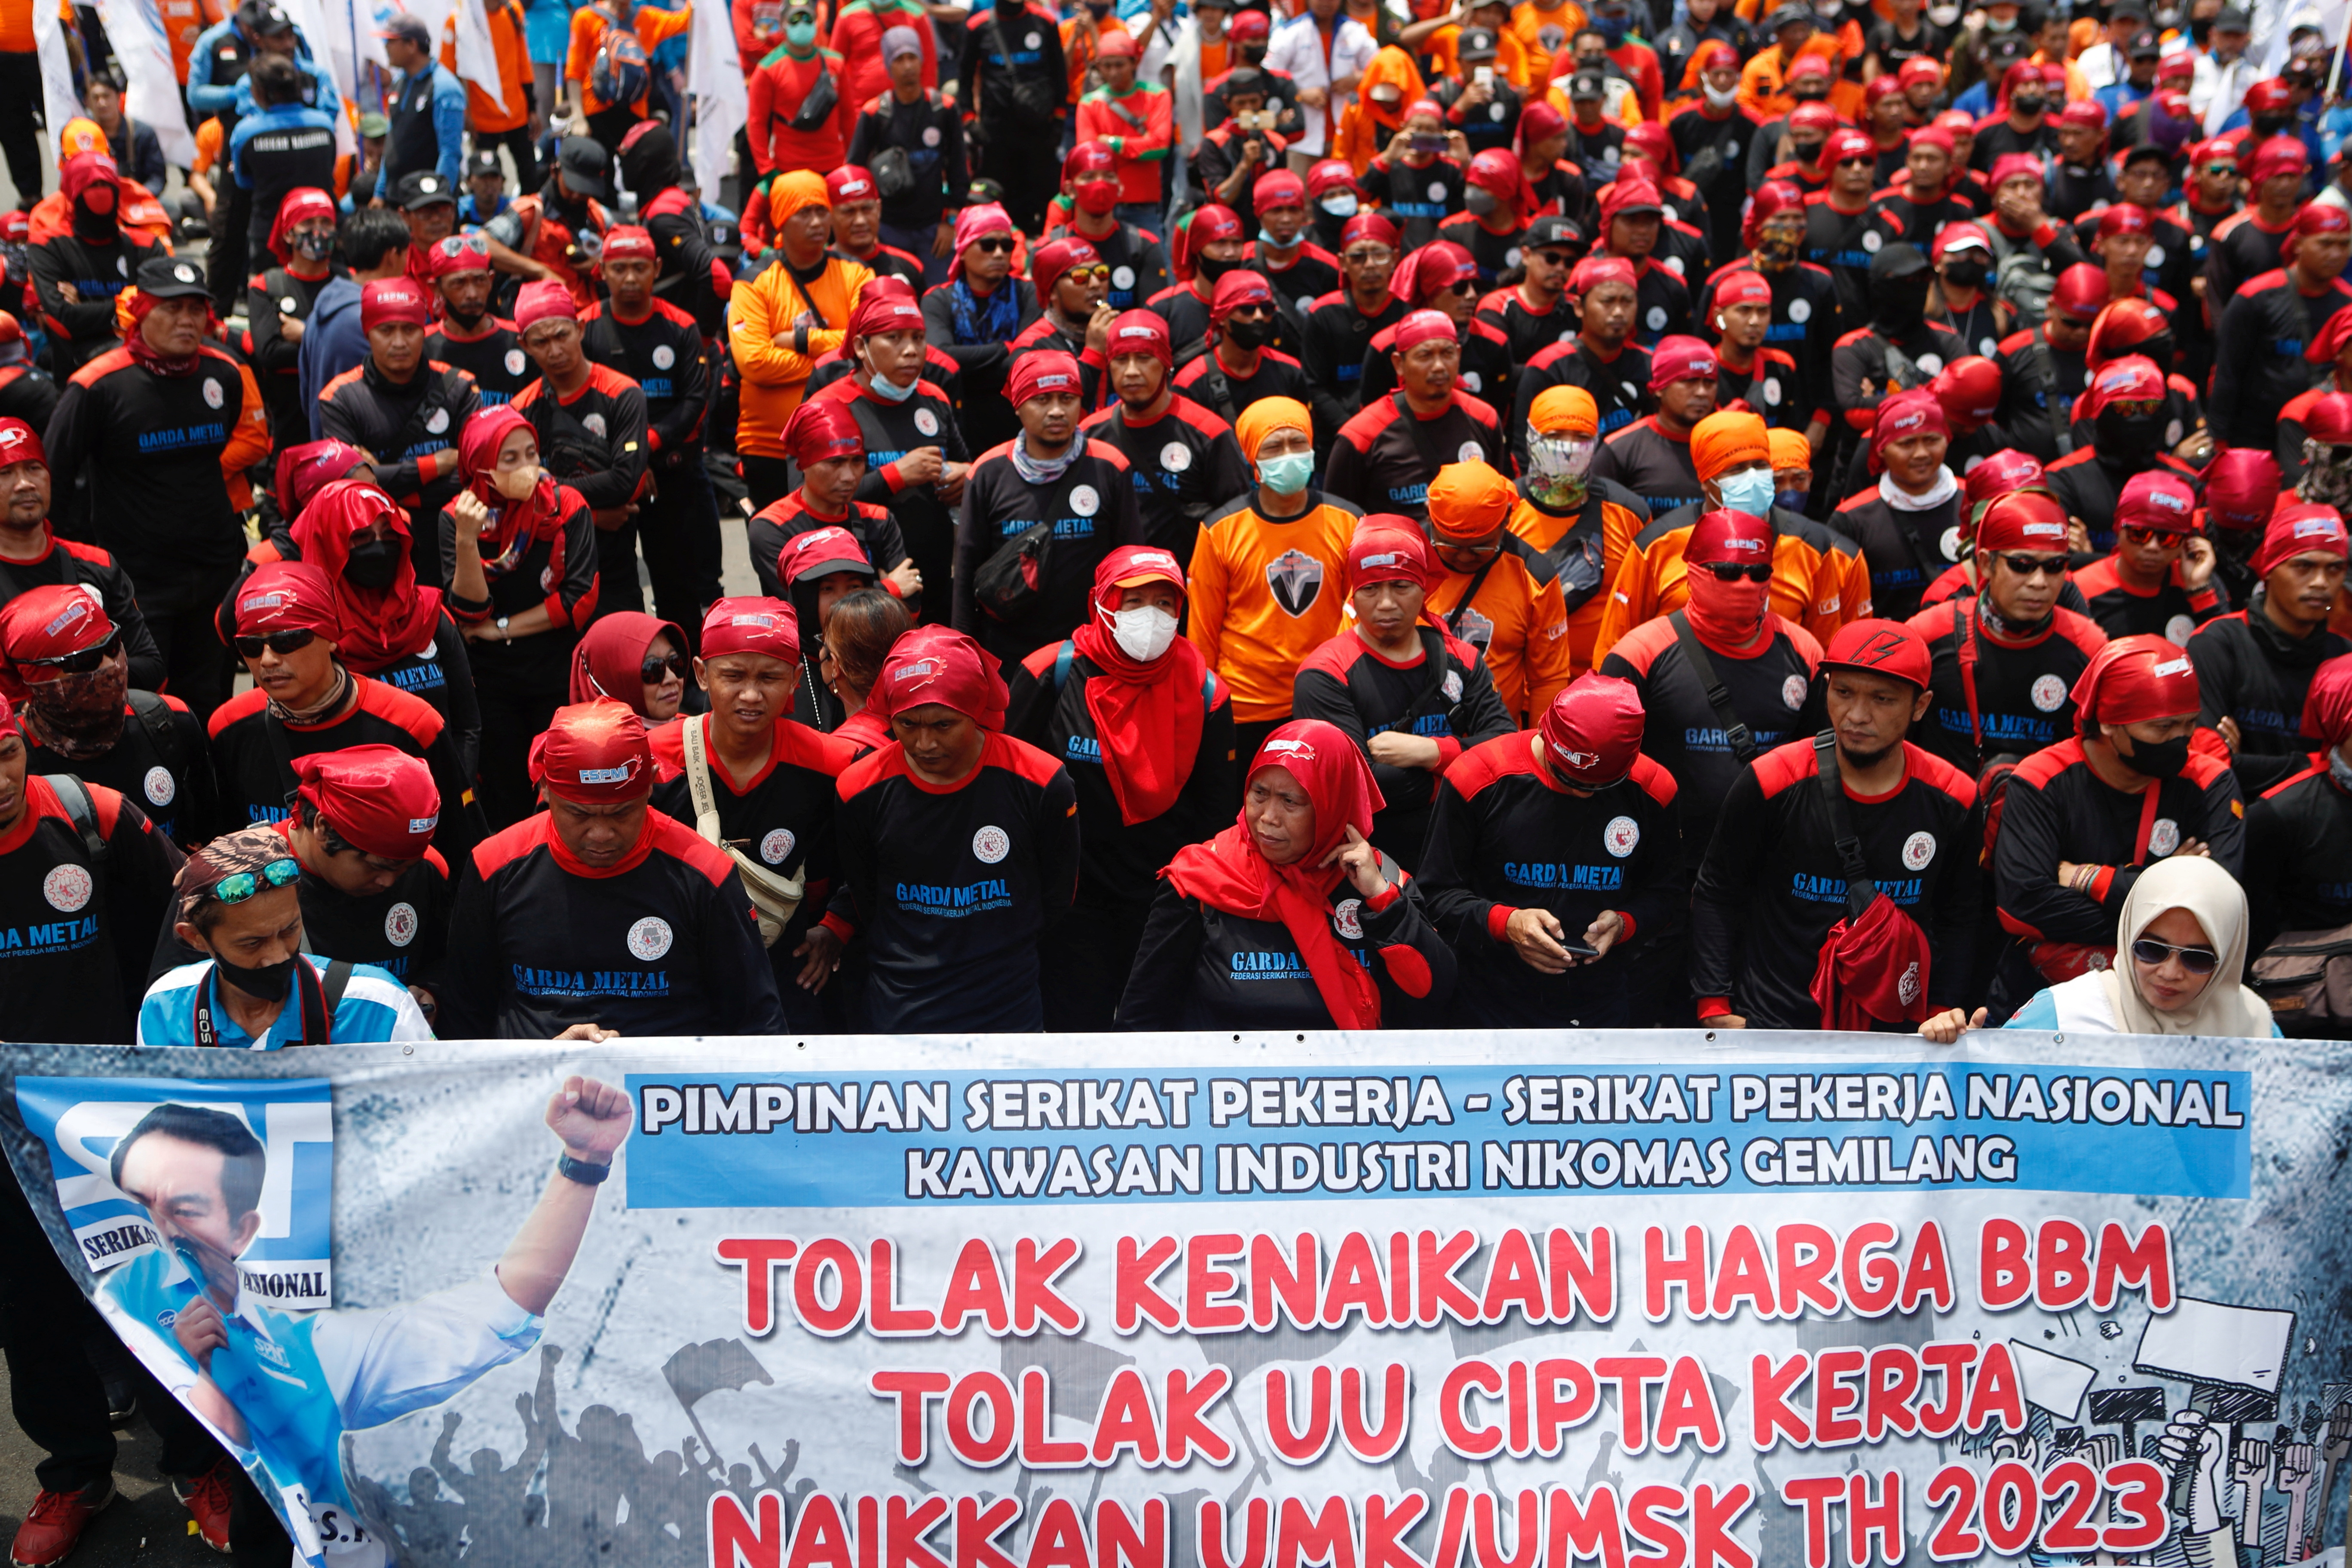 Members of Indonesian labour organizations protest against the government outside the Indonesian Parliament following raised subsidised fuel prices in Jakarta,